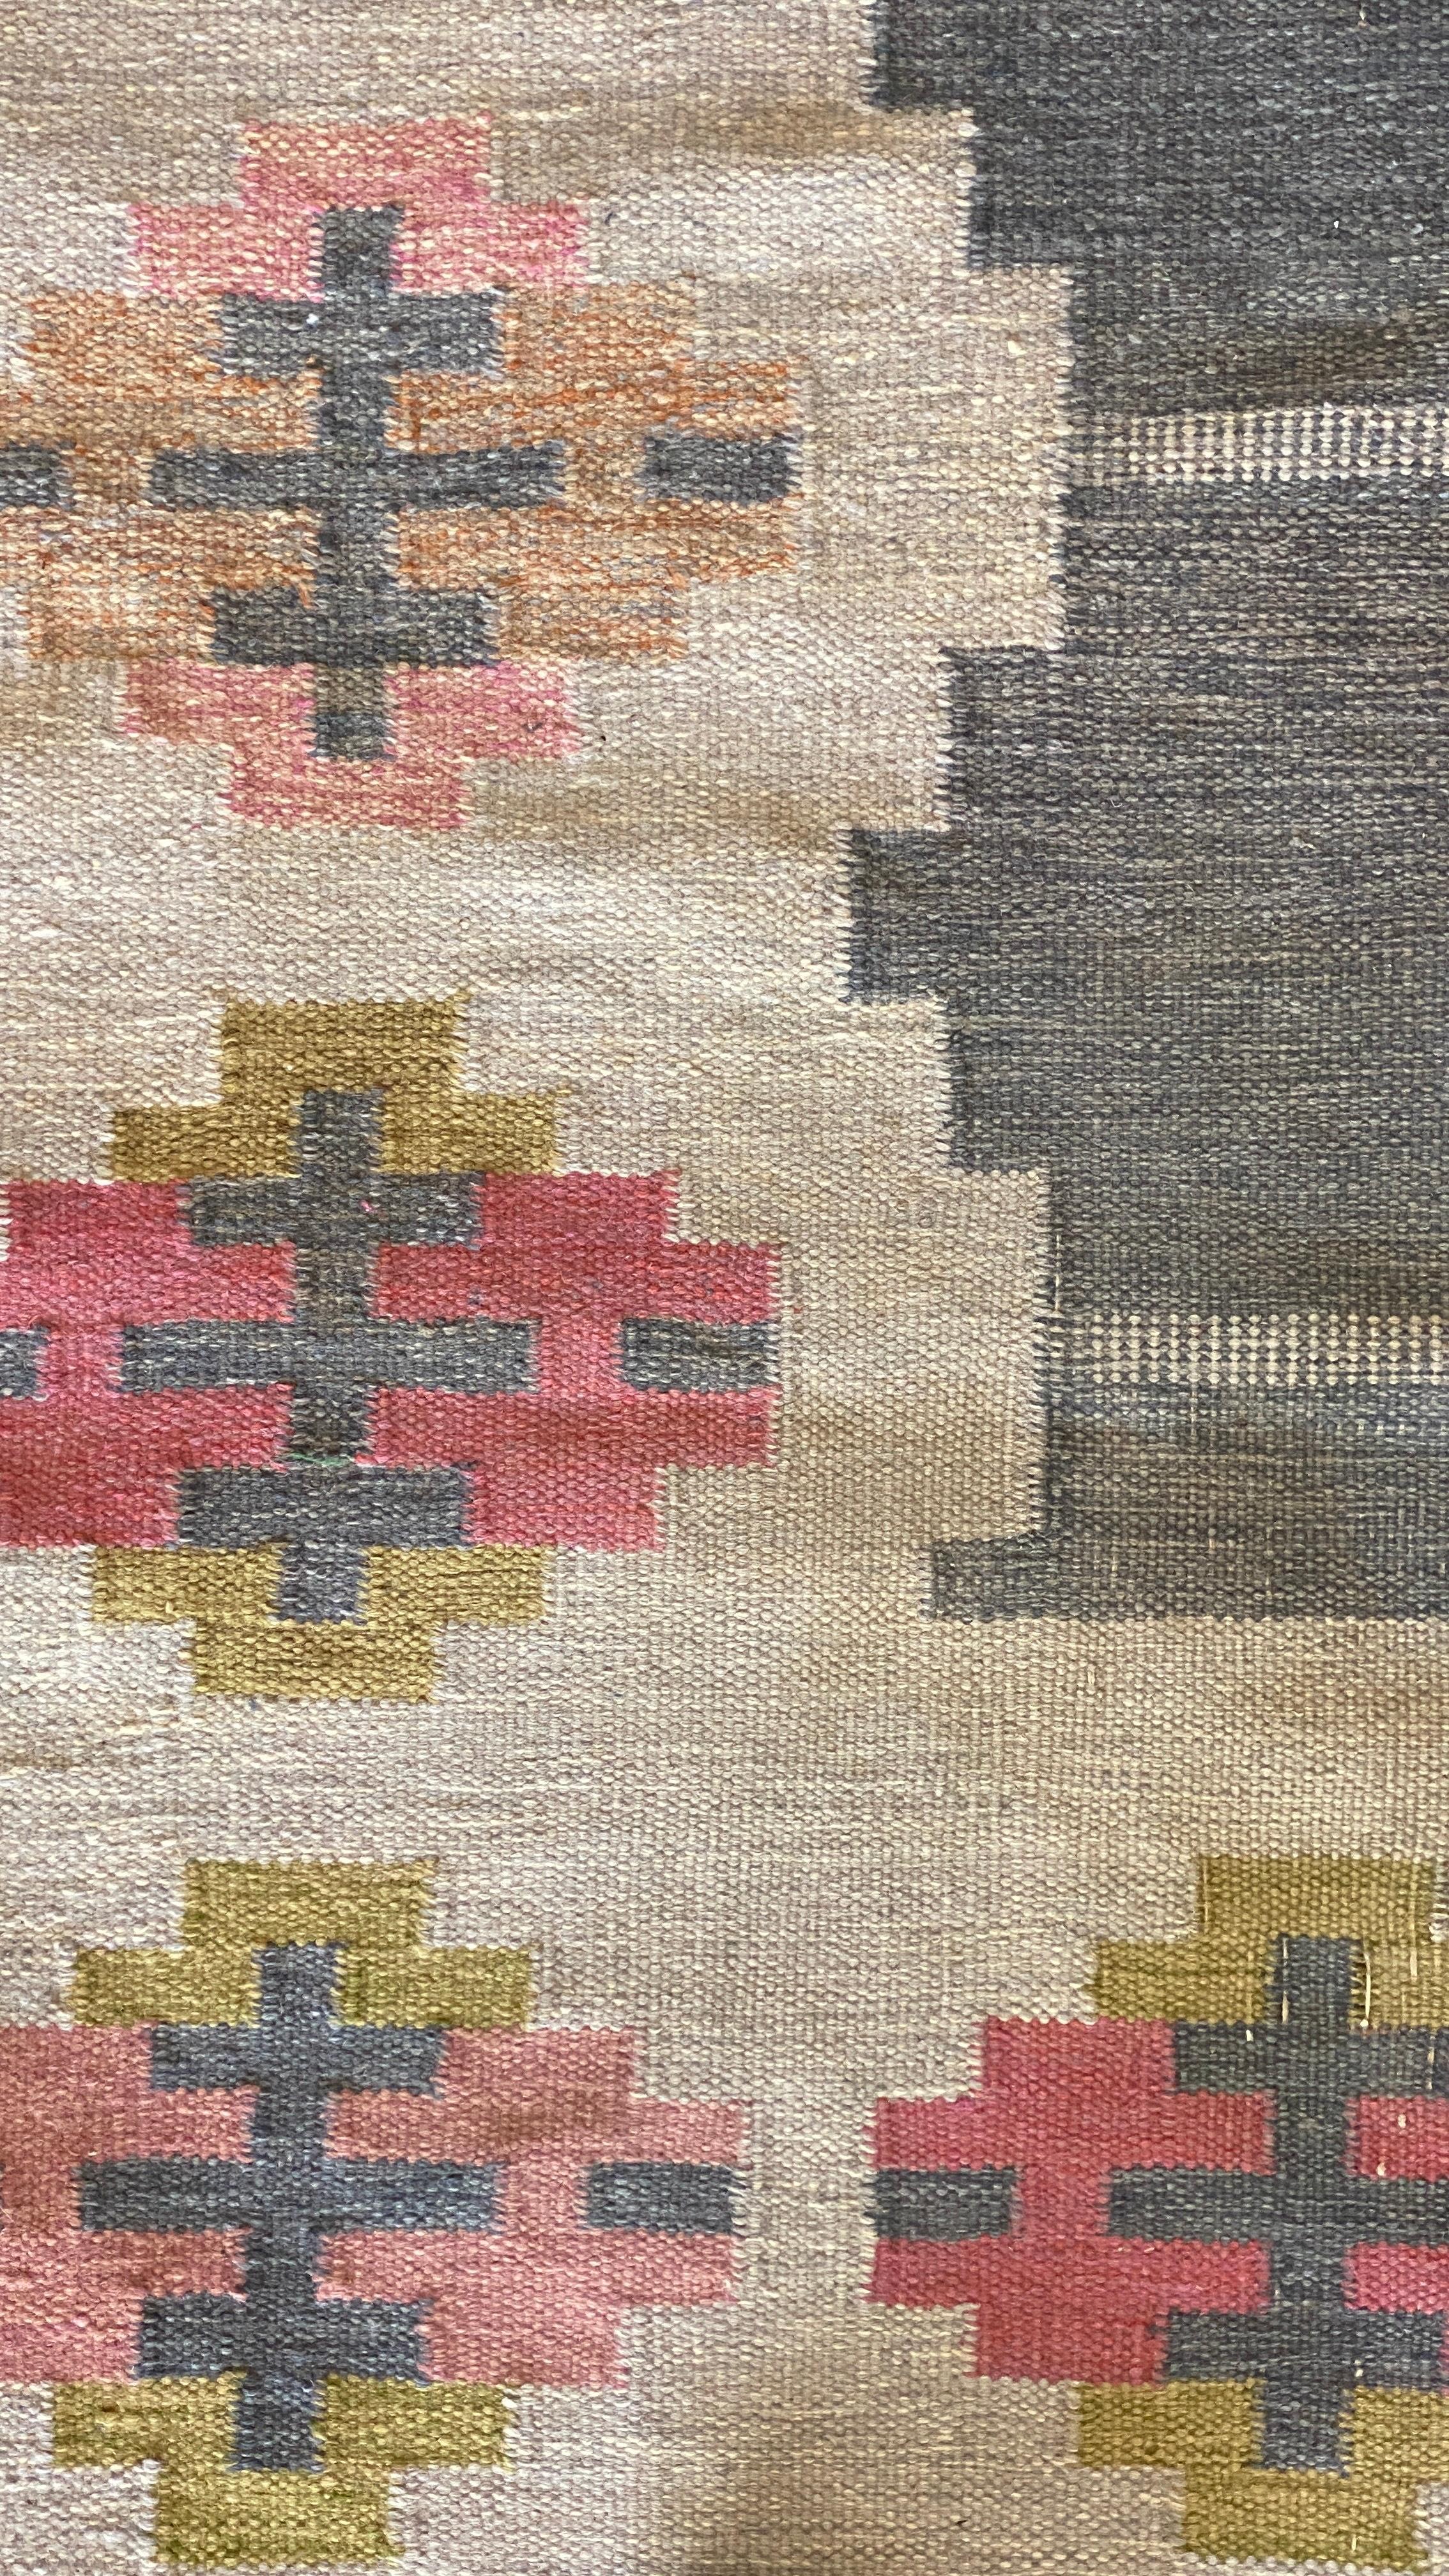 A handwoven modernist flat-weave carpet / rug by Karin Jönsson. Most likely woven in the 1950s. Handwoven in wool, using a Kilim technique. Signed. 

Follows a lineage of Modernist rugs produced in Sweden throughout the 20th century. Other artists